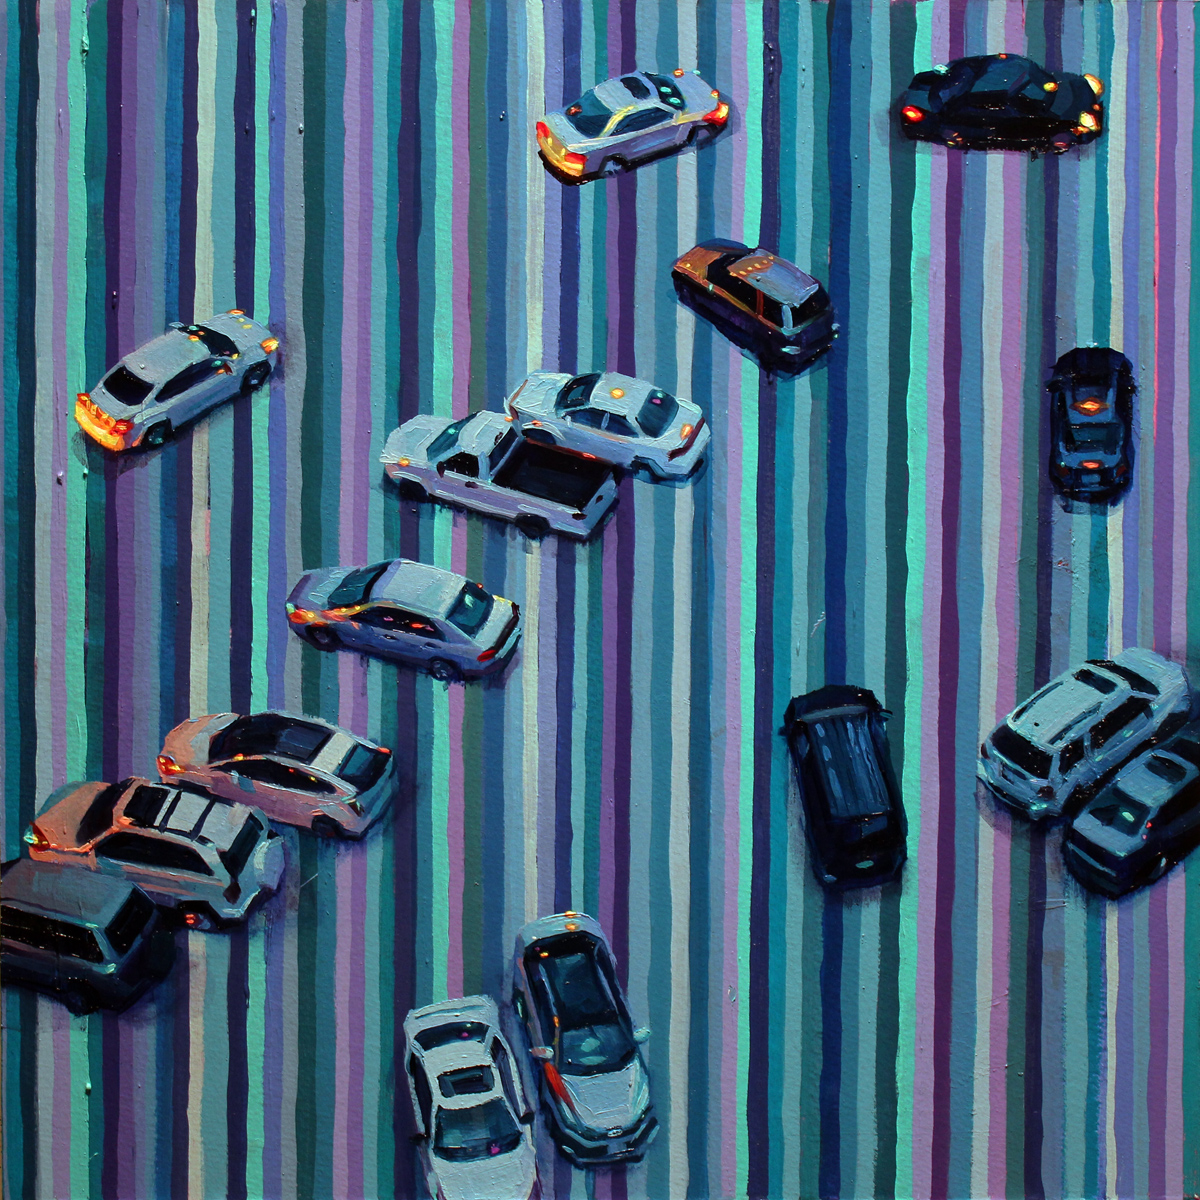  "Cars and Stripes", oil on paper adhered to wood, 2017&nbsp; 